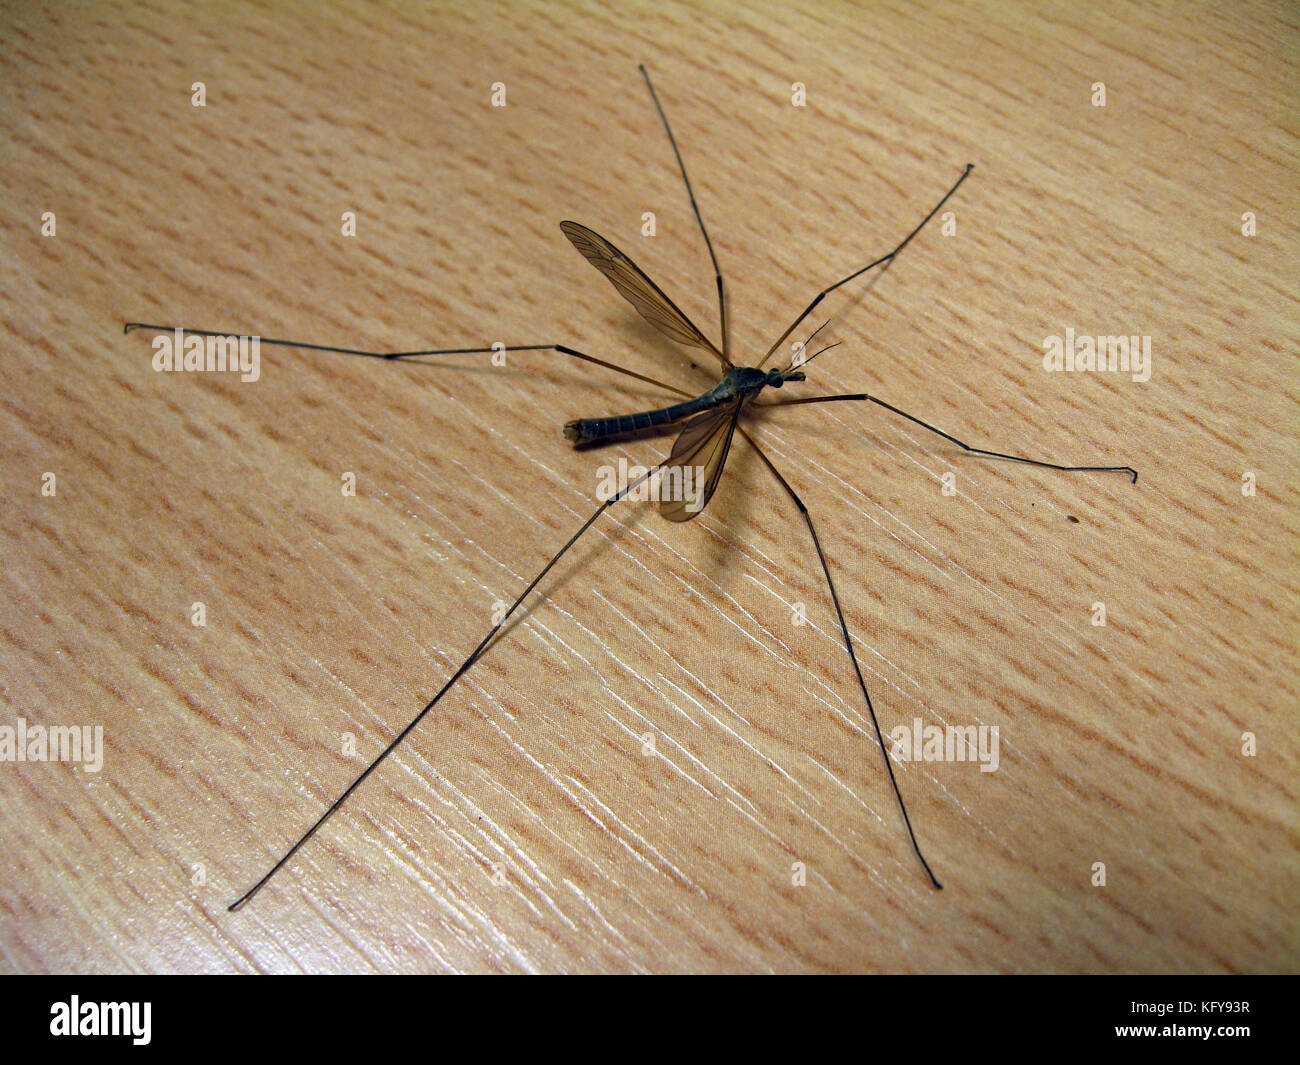 Huge mosquito with long legs on wooden surface Stock Photo